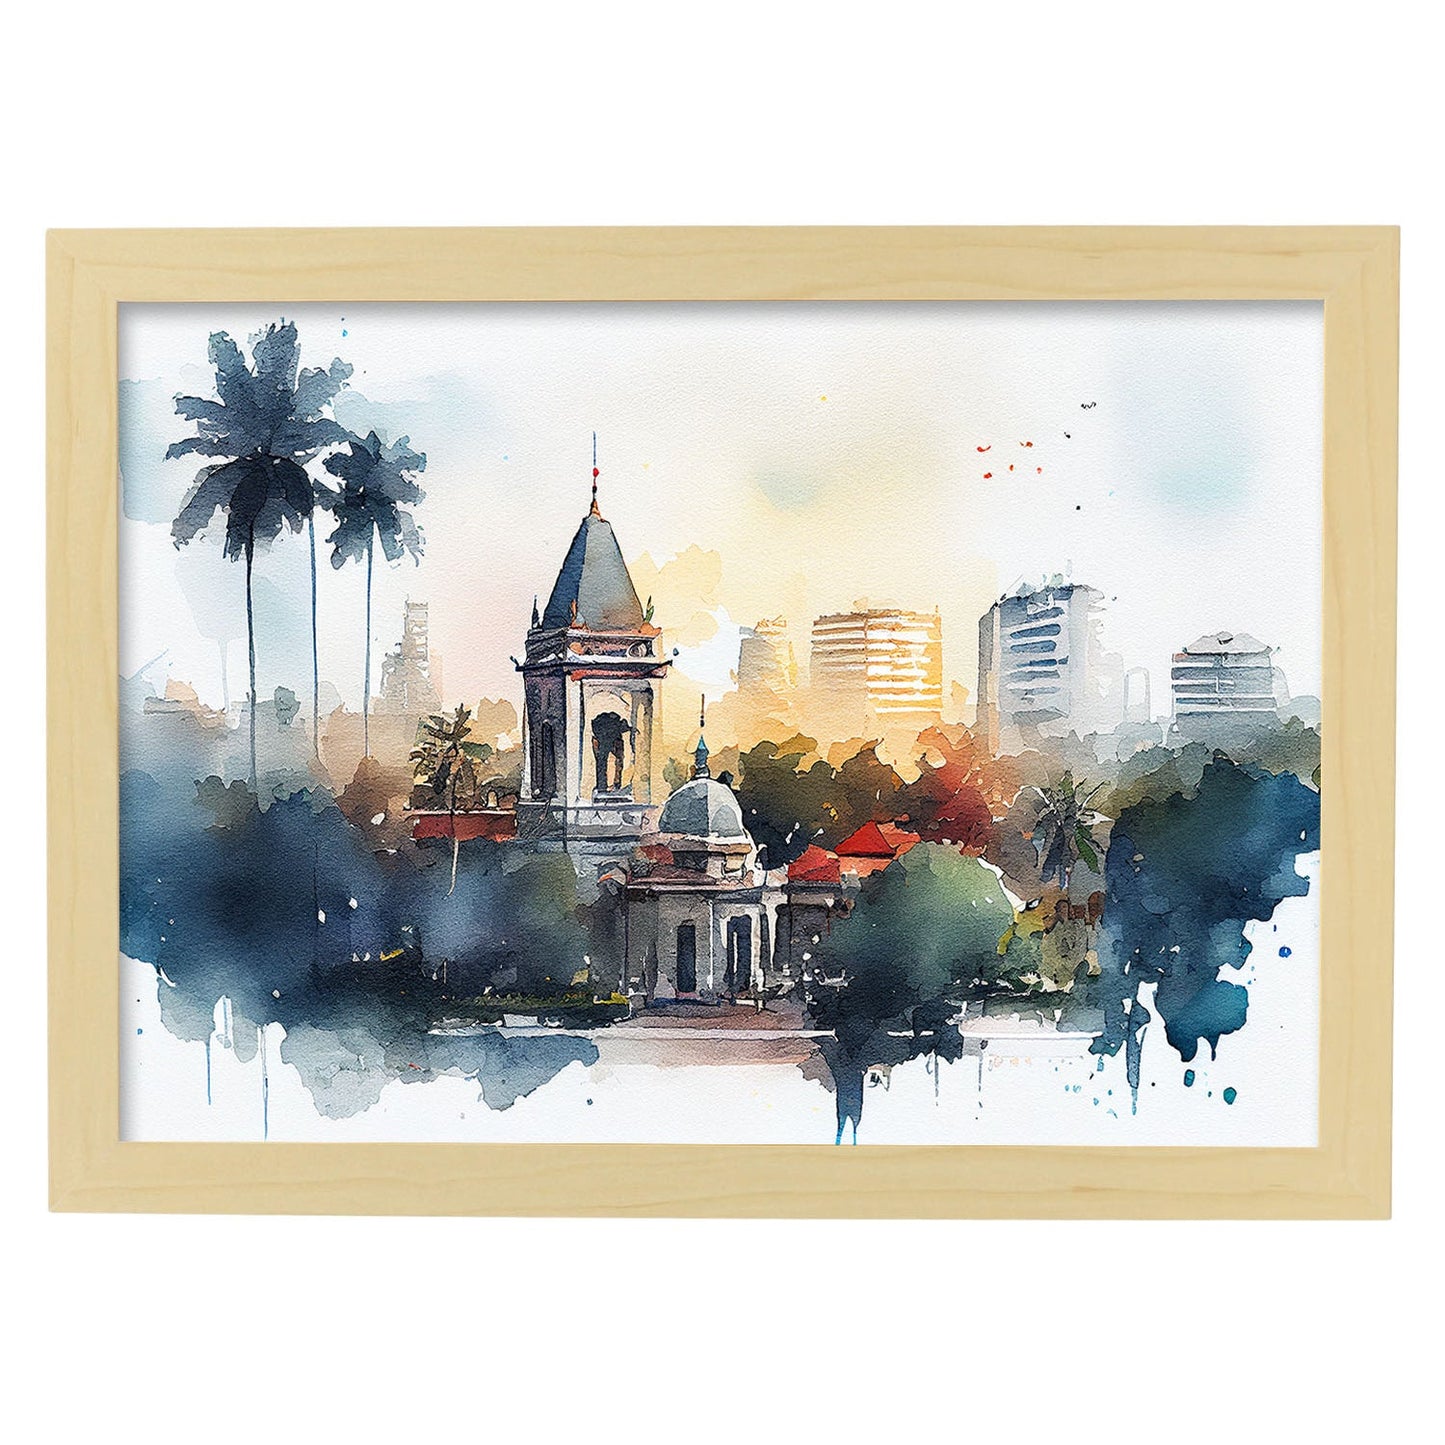 Nacnic watercolor of a skyline of the city of Hanoi_2. Aesthetic Wall Art Prints for Bedroom or Living Room Design.-Artwork-Nacnic-A4-Marco Madera Clara-Nacnic Estudio SL